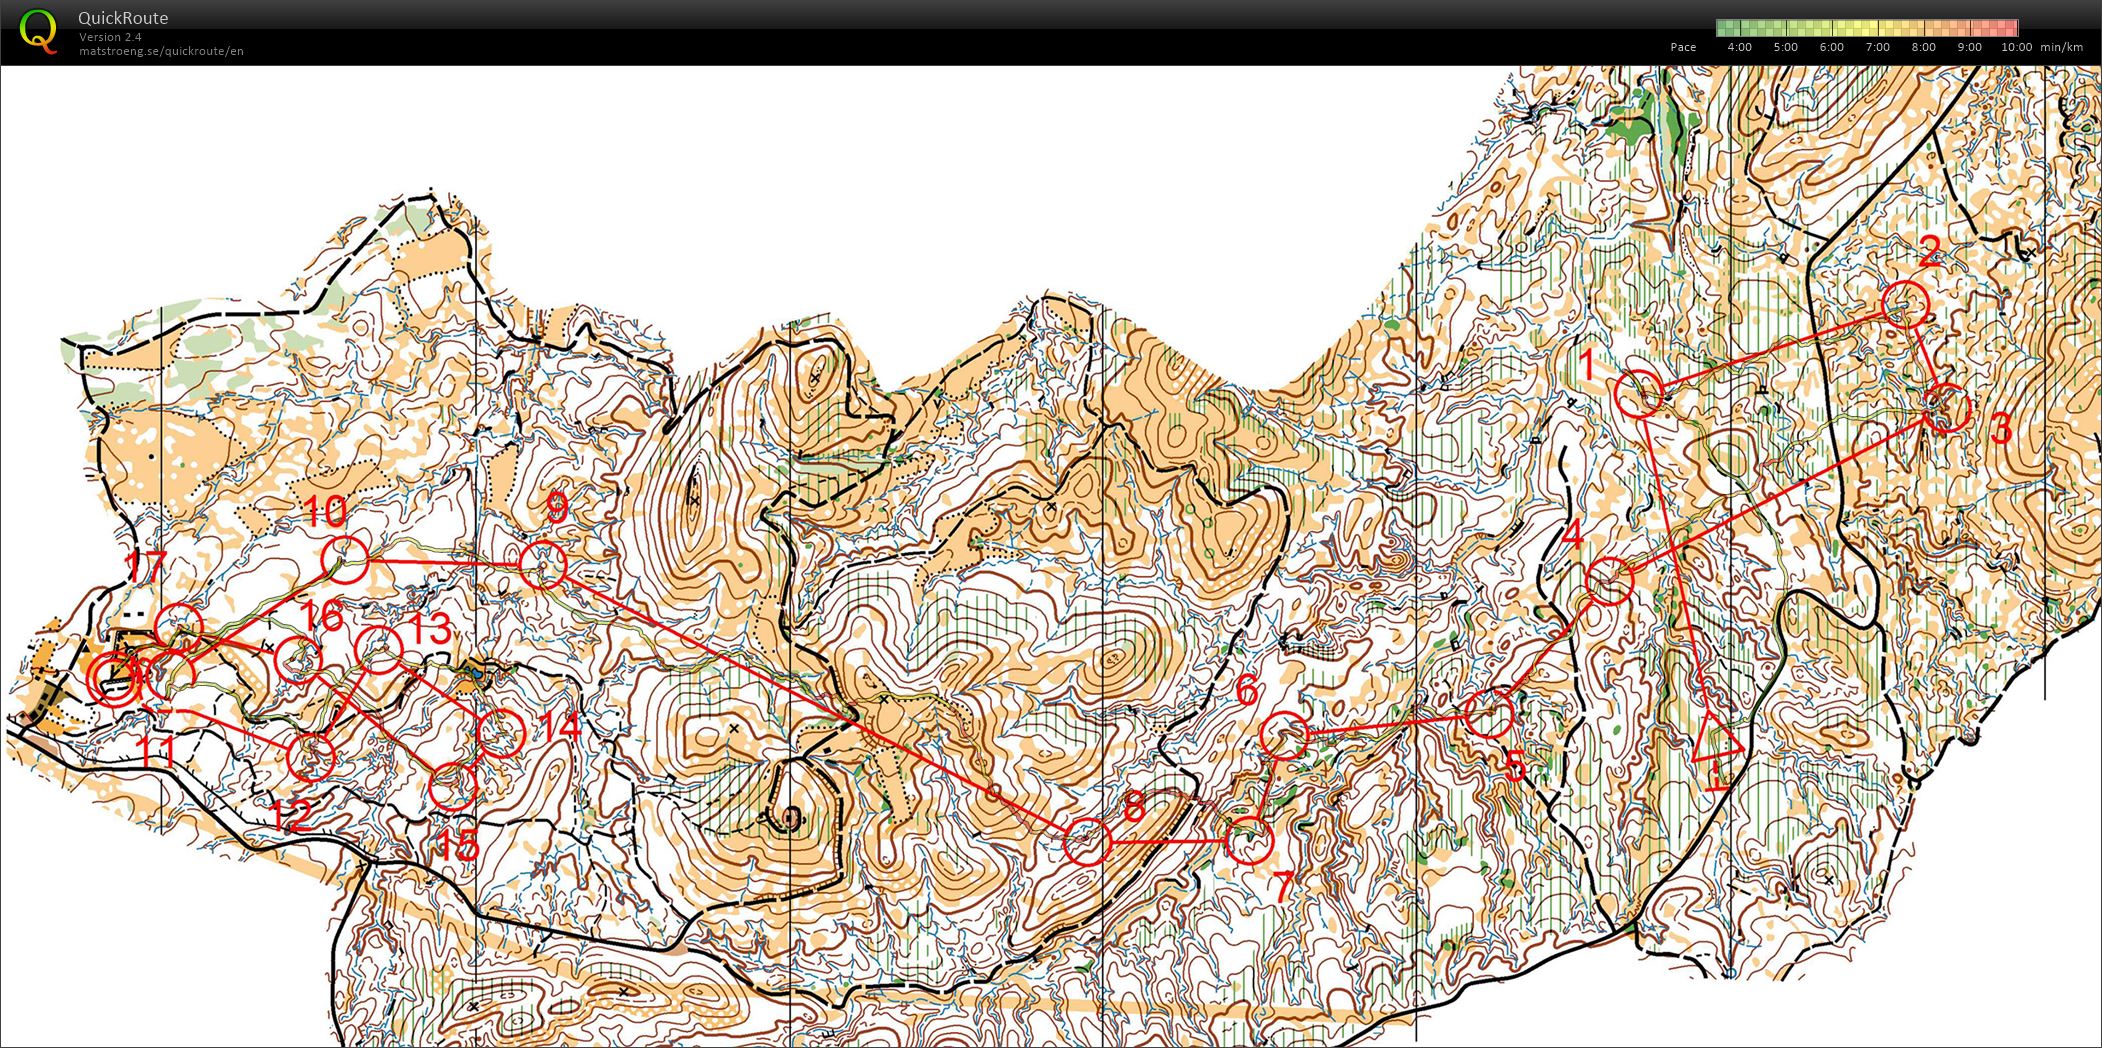 World Cup course W - middle  (31-12-2014)